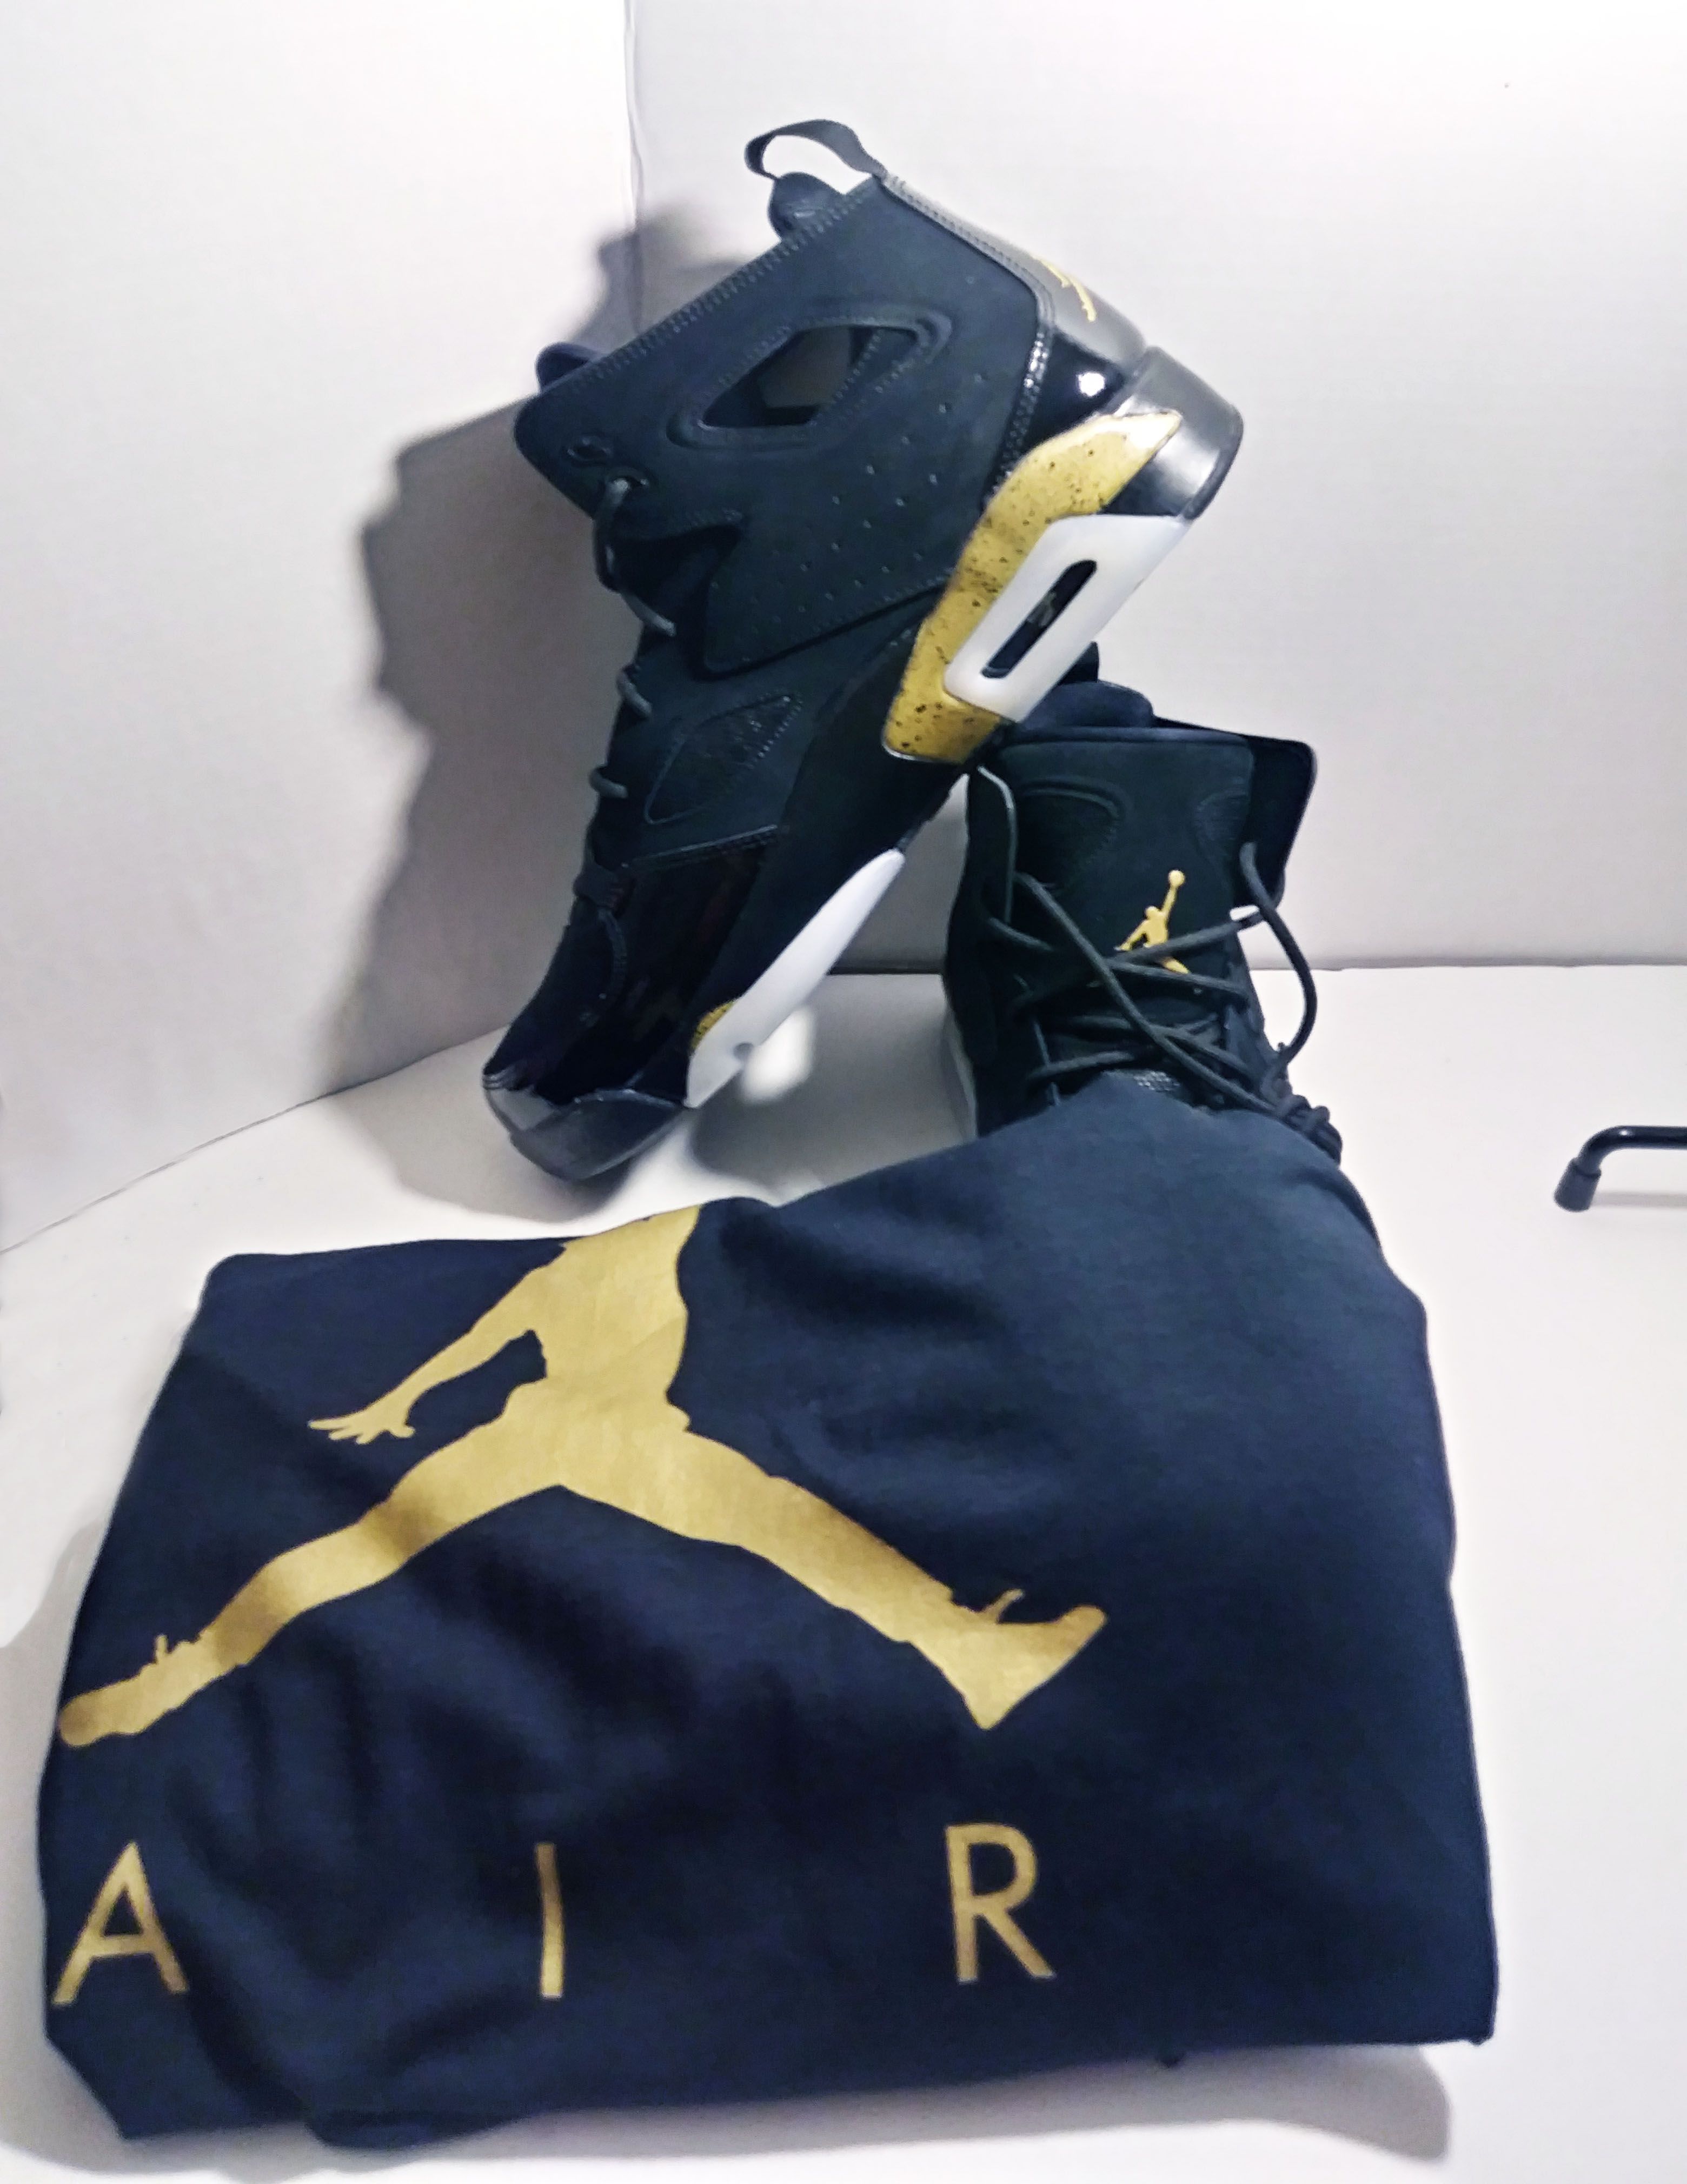 New! Nike Air Jordan Fight Club '91 Black and Gold Basketball Shoe -12 and with XL long sleeve Jumpman Crew neck Tshirt